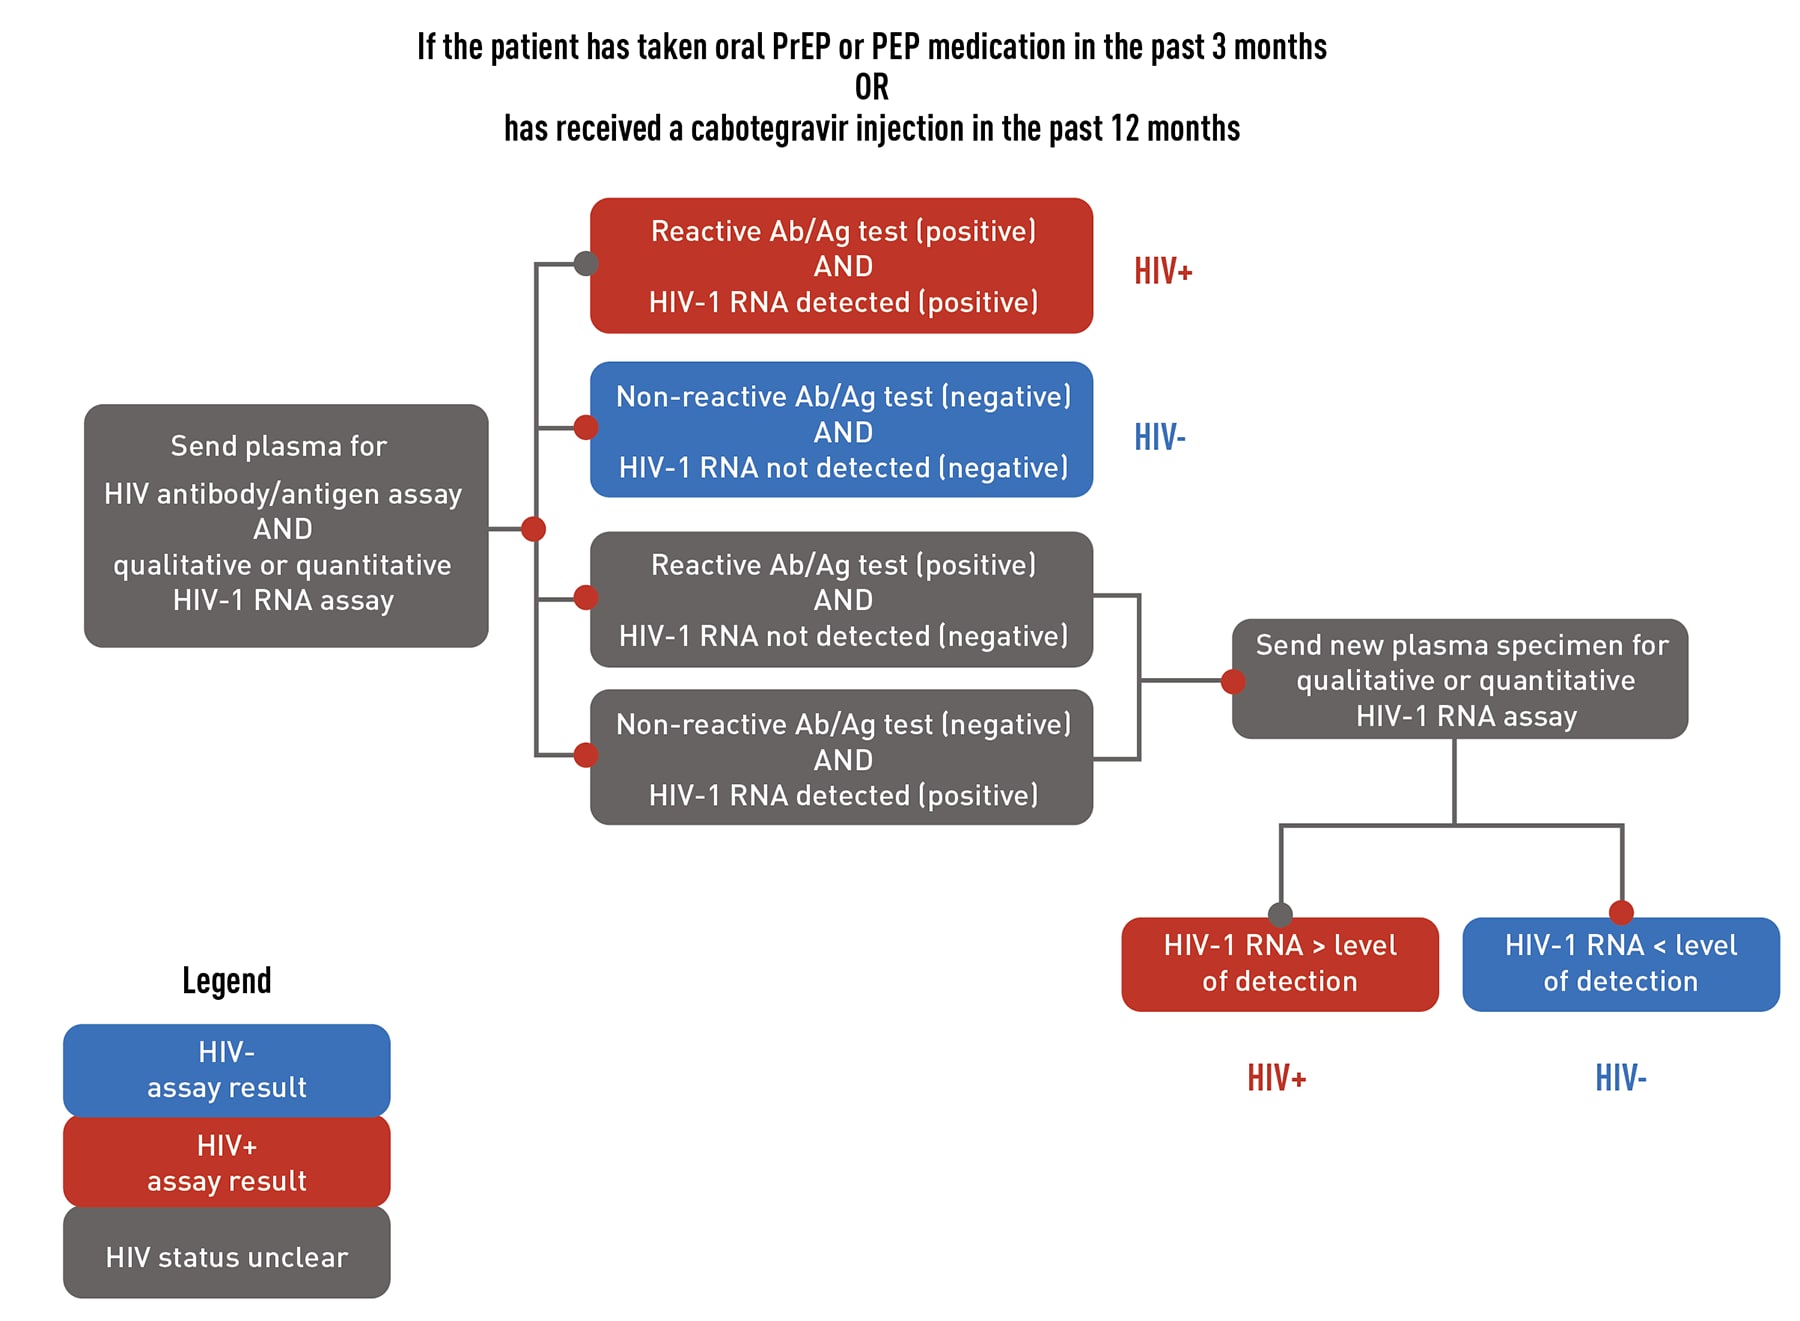 This flowchart describes HIV testing for a patient who has taken oral PrEP or PEP medication in the past 3 months or who has received a cabotegravir injection in the past 12 months.